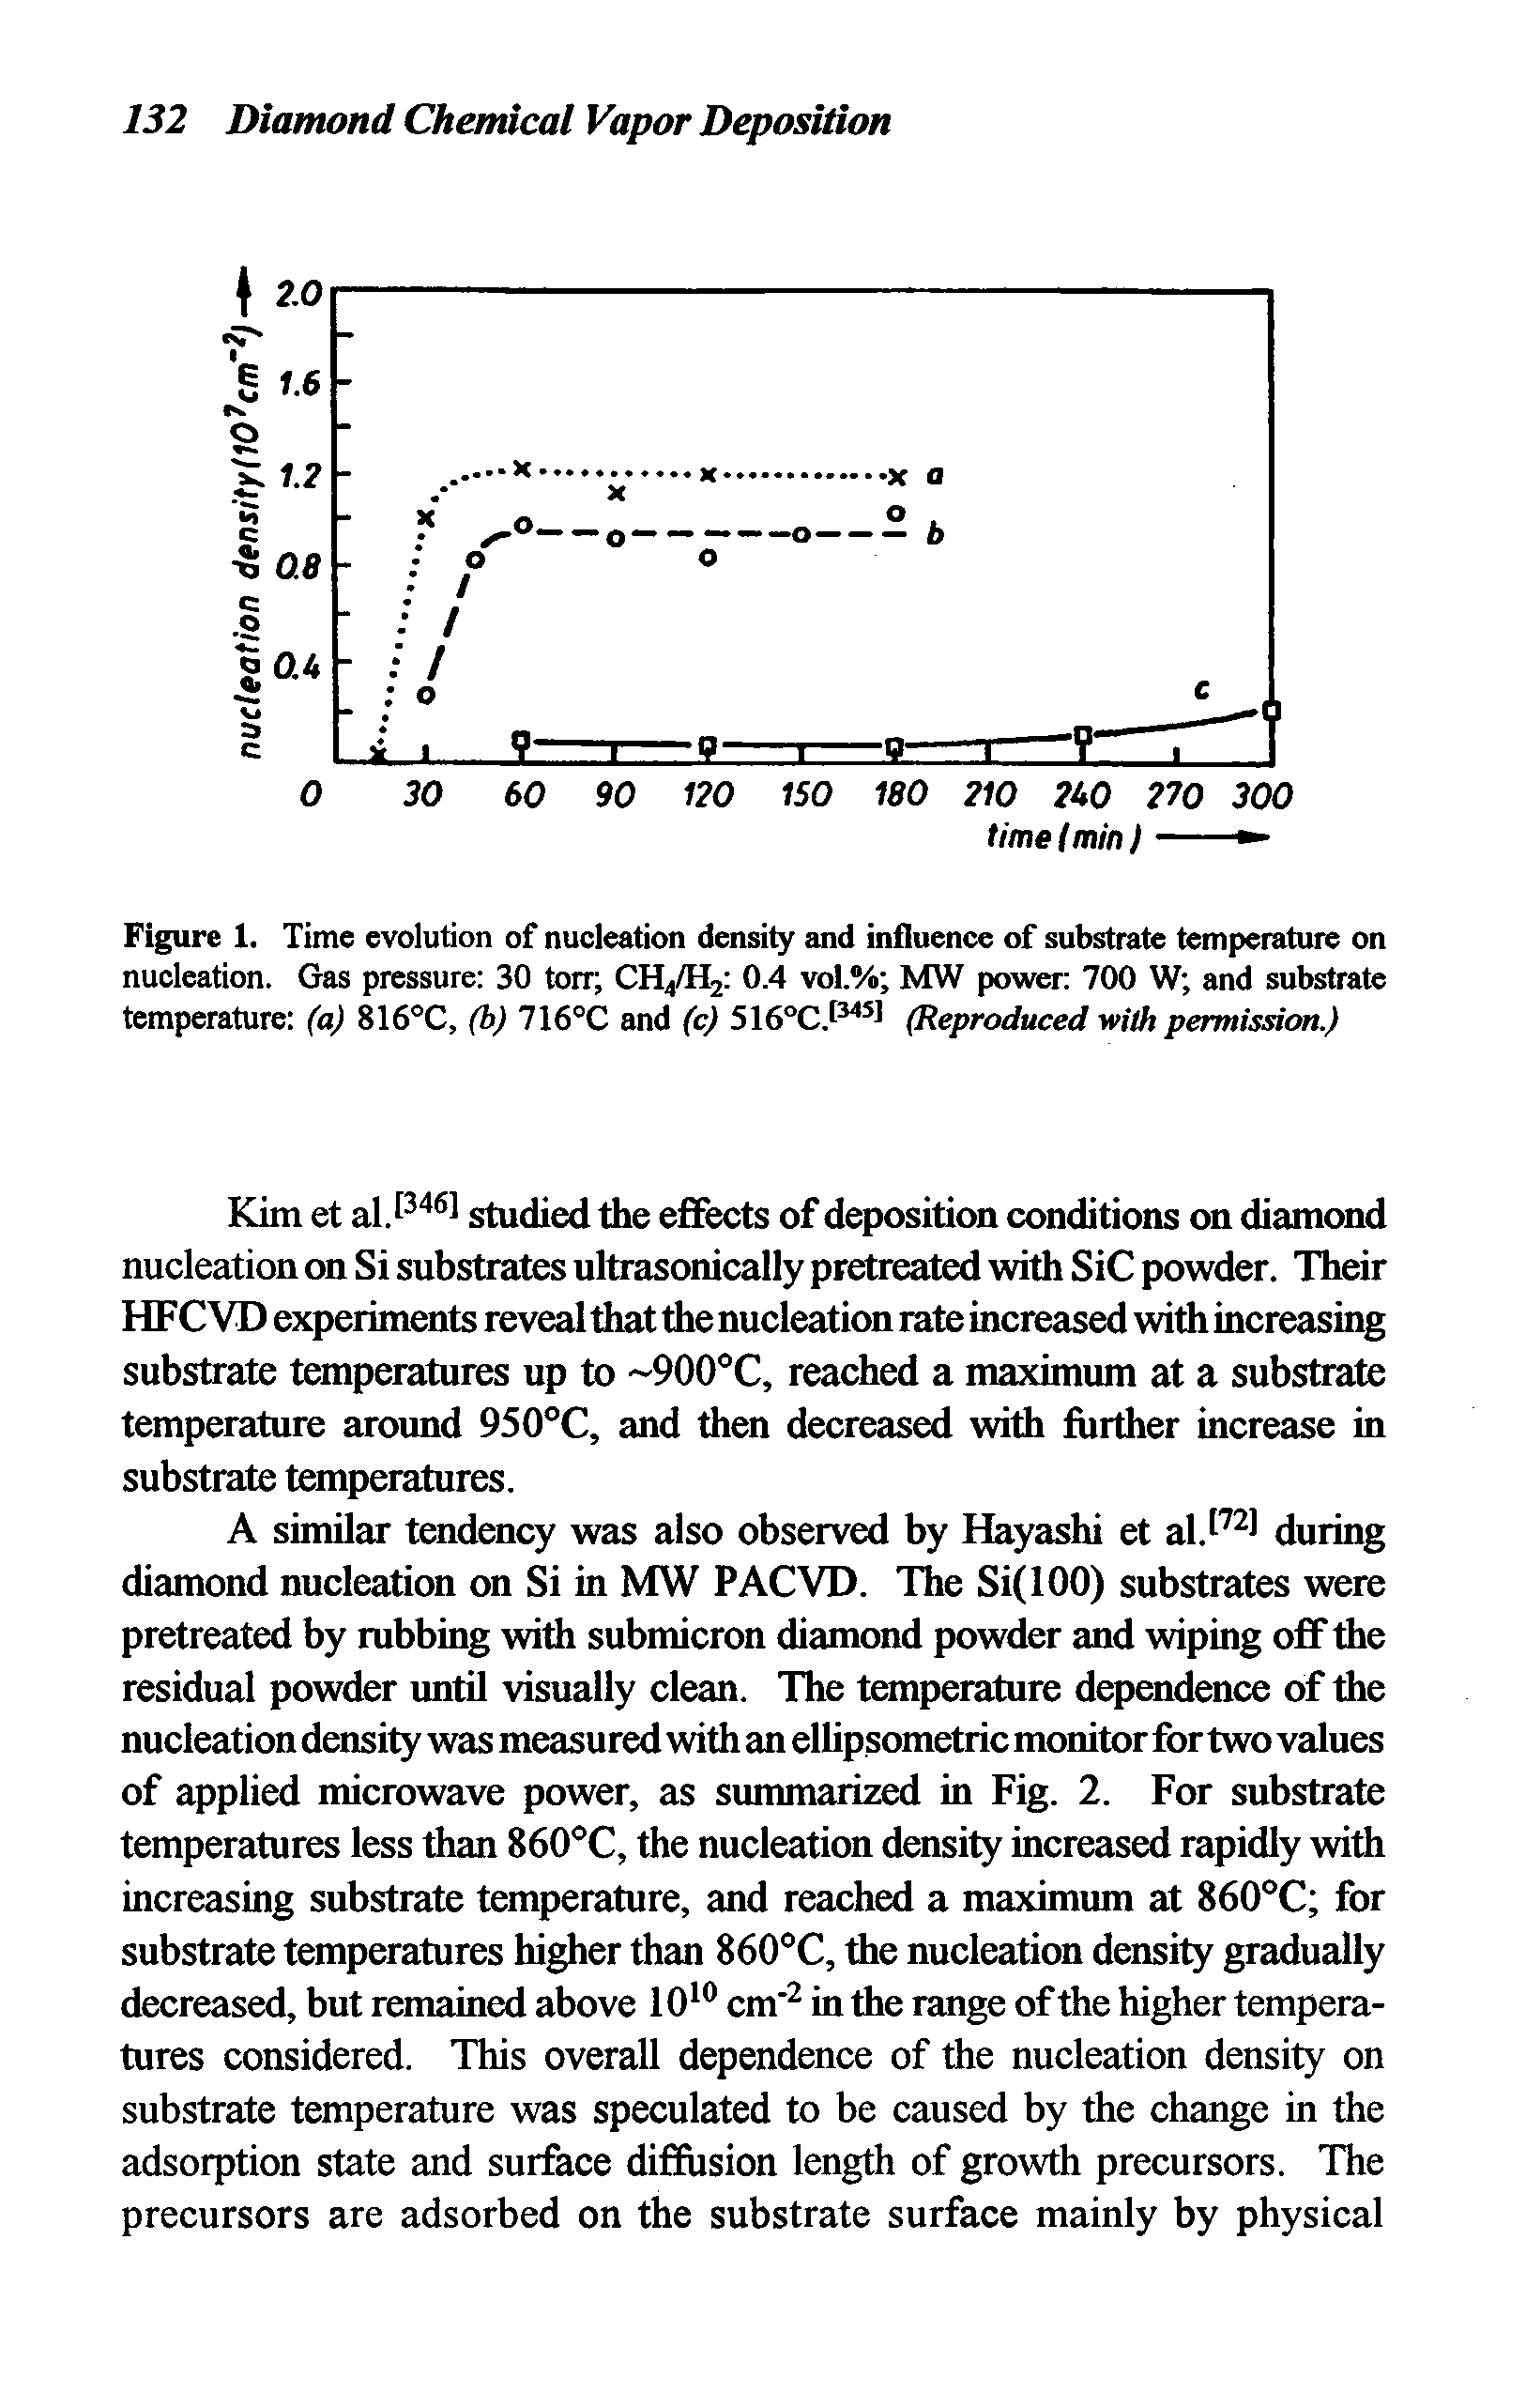 Figure 1. Time evolution of nucleation density and influence of substrate temperature on nucleation. Gas pressure 30 torr CH4/H2 0.4 vol.% MW power 700 W and substrate temperature (a) 816°C, (b) 716°C and (c) 516°C.t l (Reproduced with permission.)...